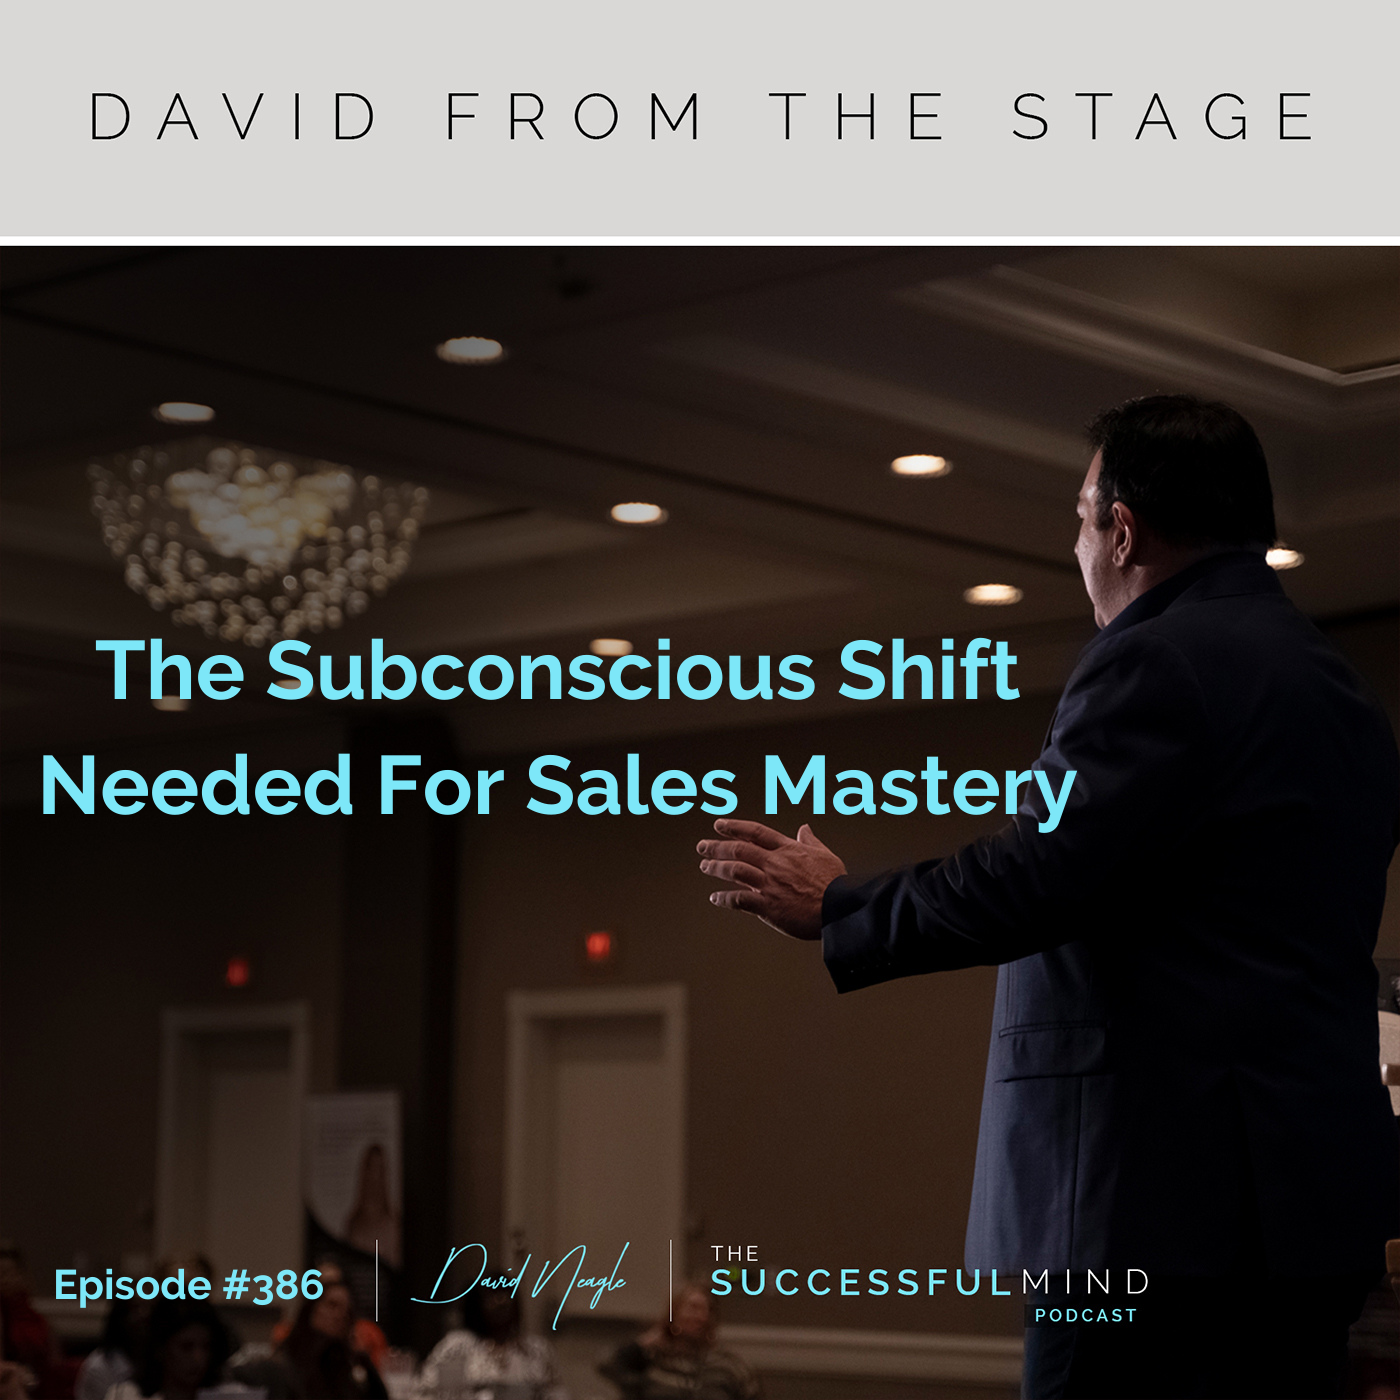 David From The Stage: The Subconscious Shift Needed For Sales Mastery